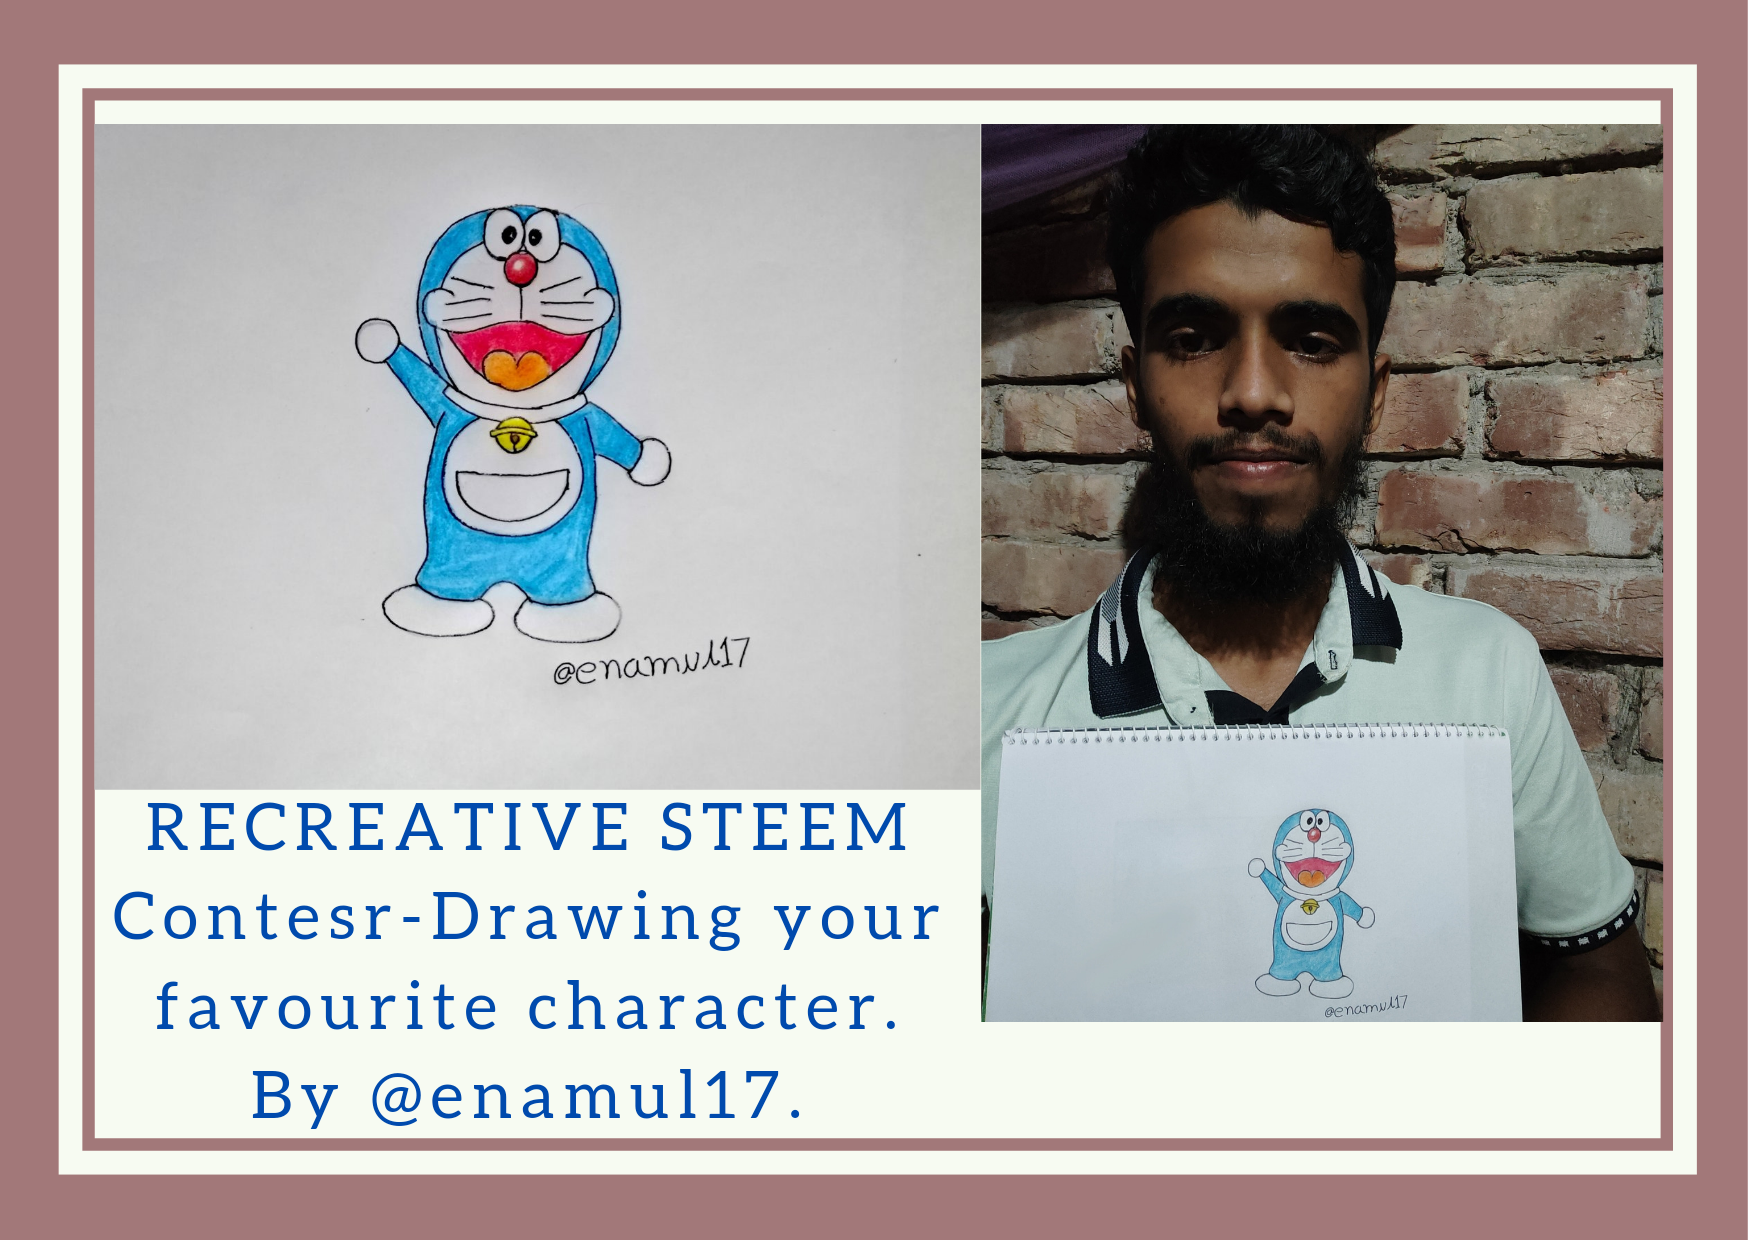 Step-by-step instruction | How to Draw Doraemon